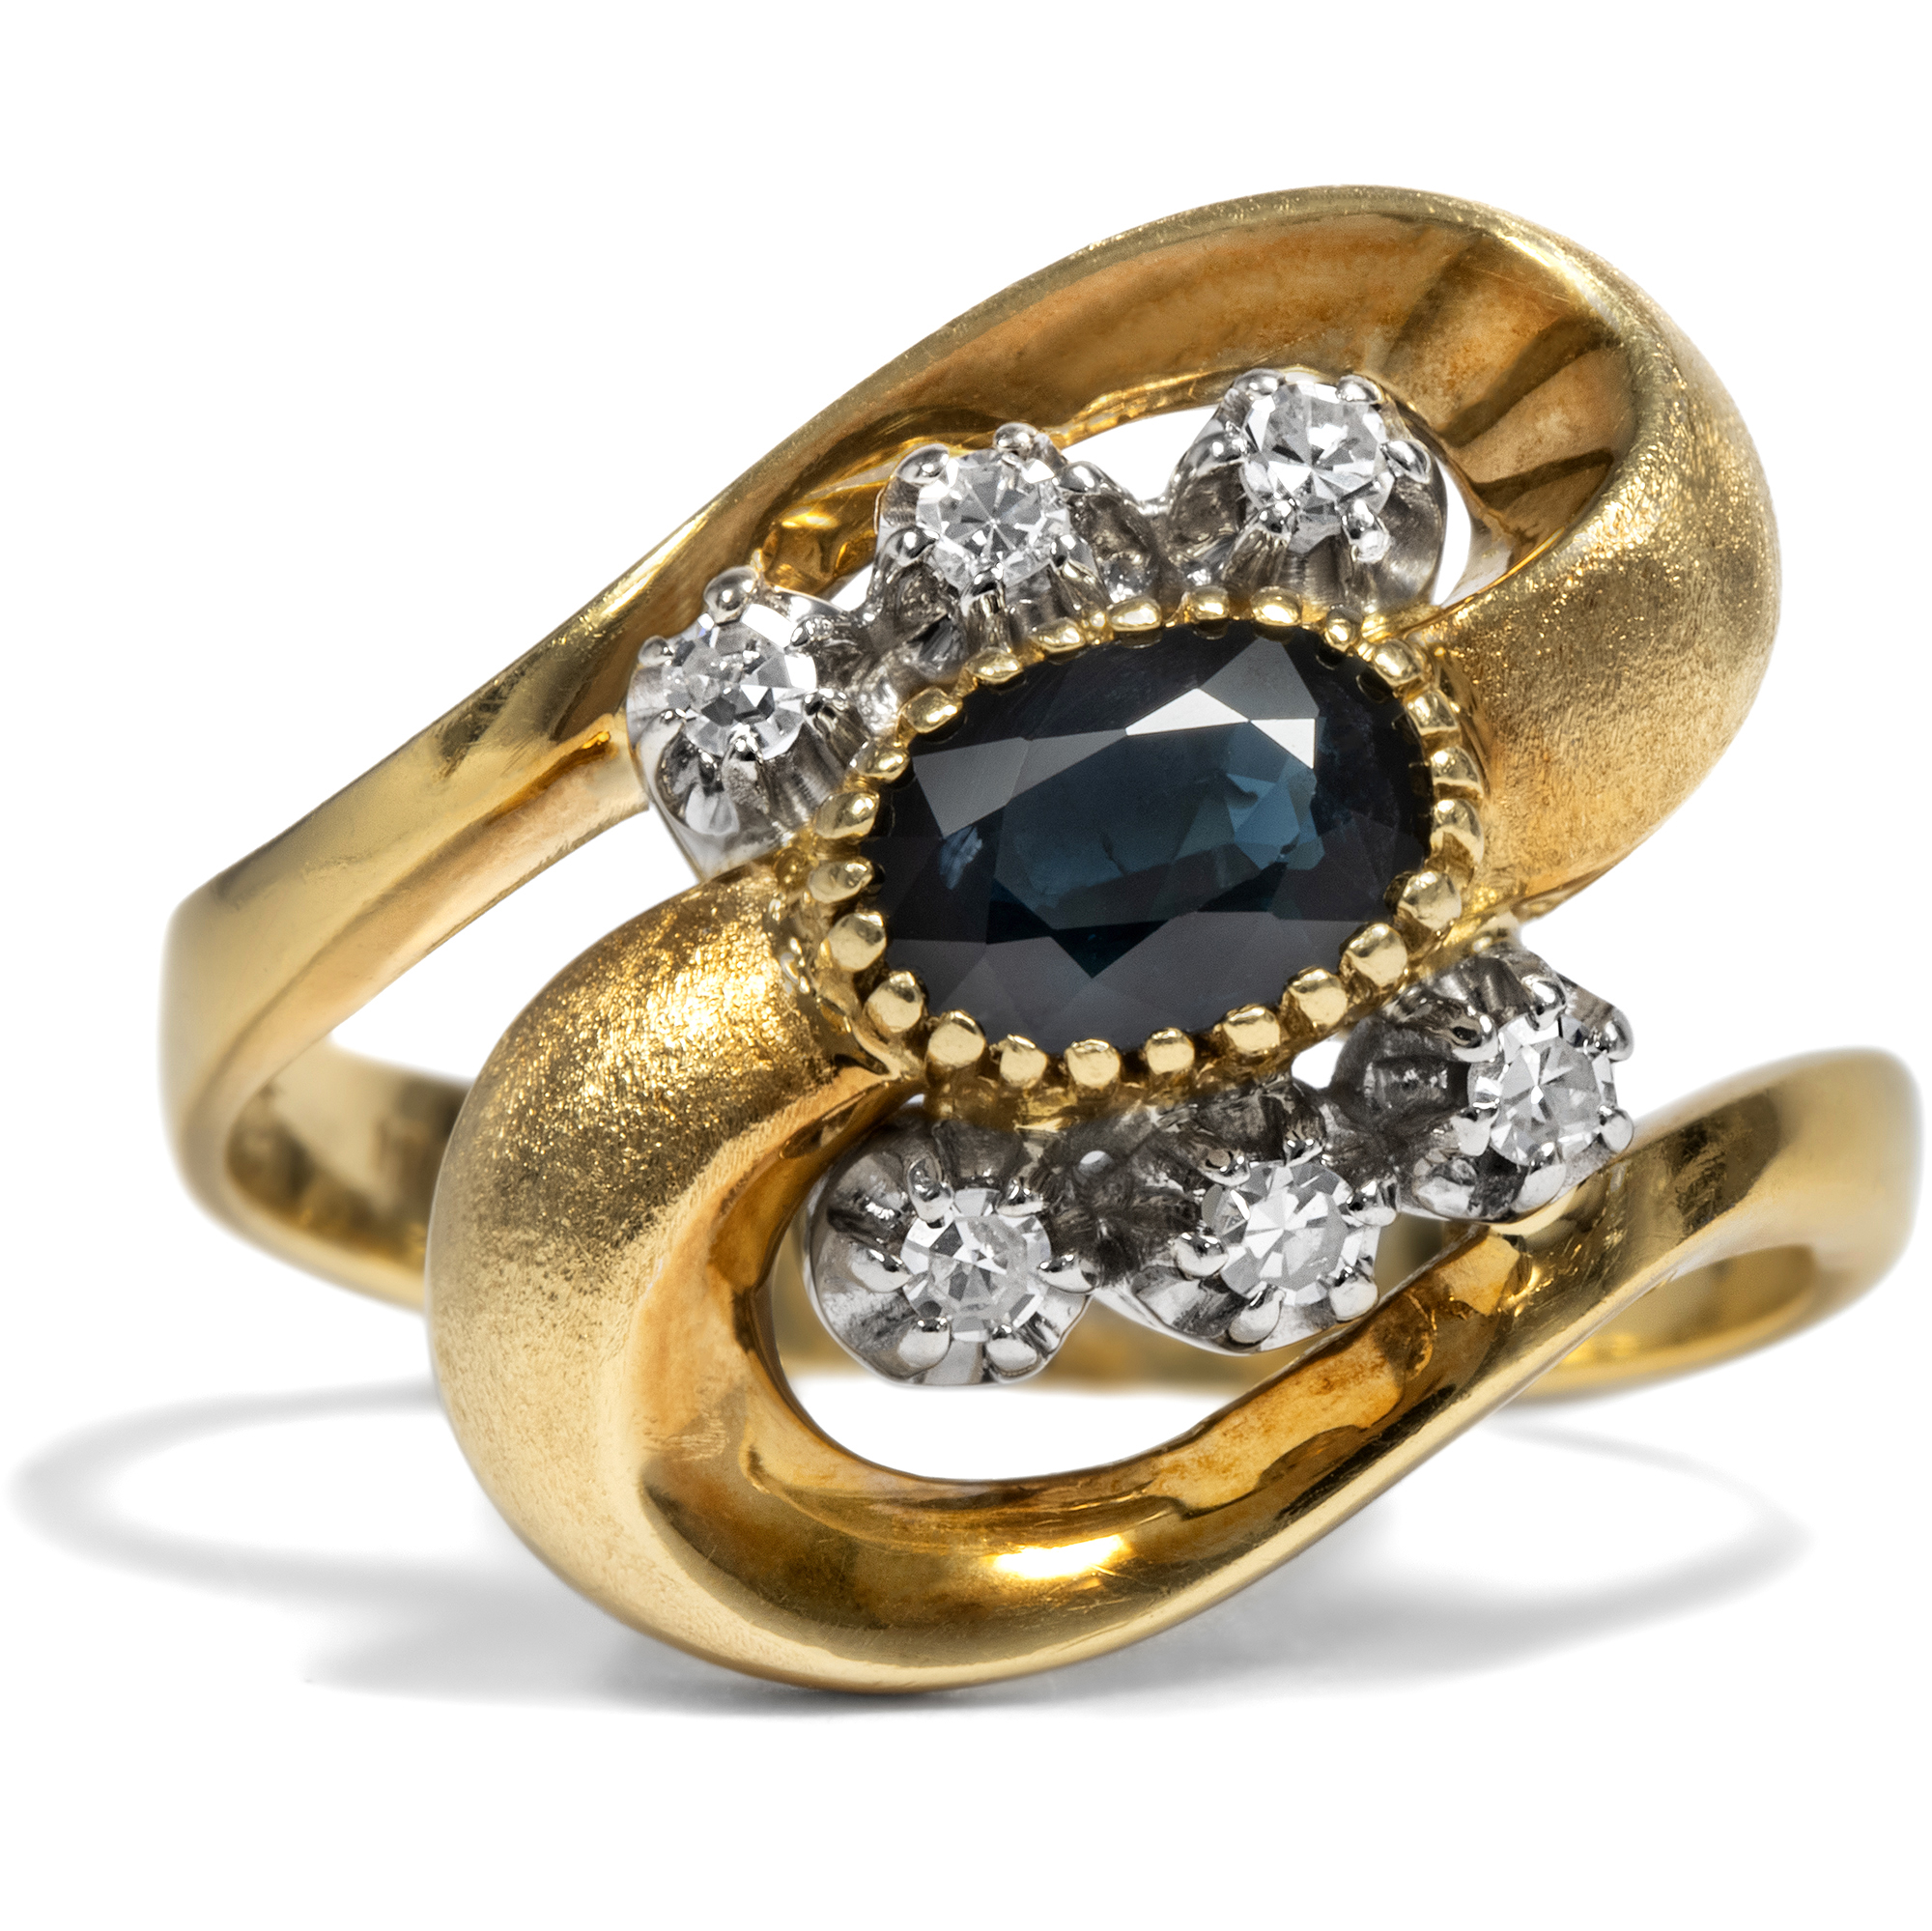 Dynamic Vintage Ring with Sapphire & Diamonds in Gold, USA c. 1970